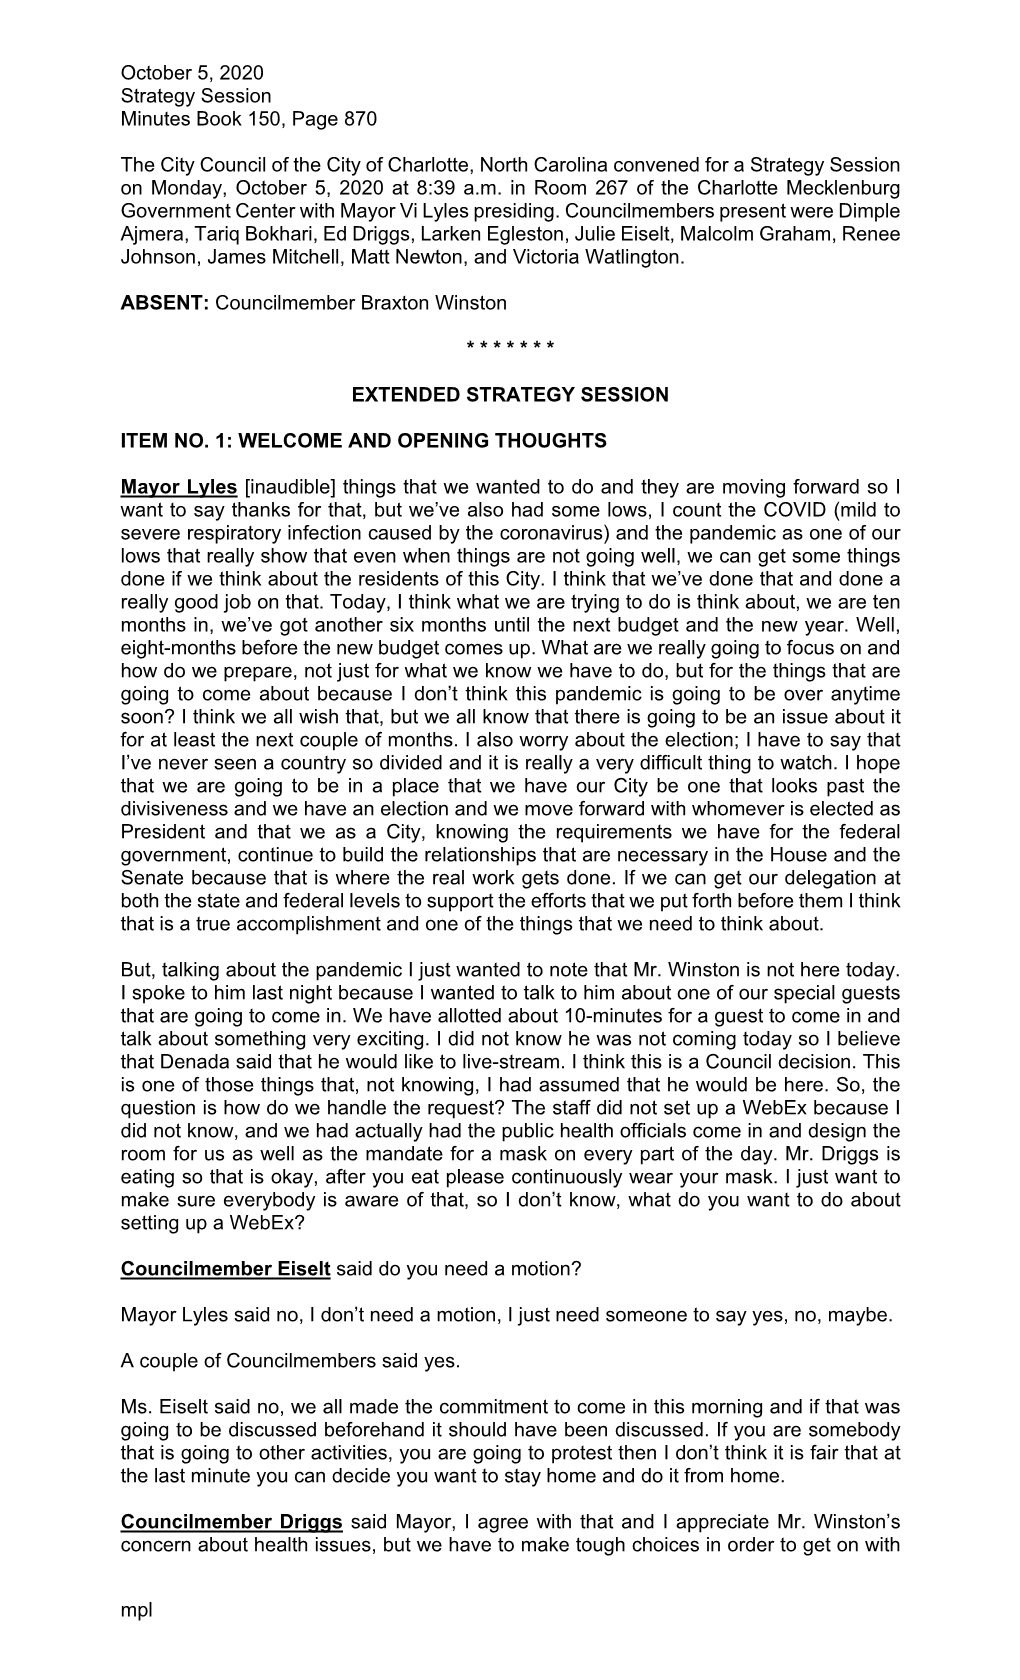 October 5, 2020 Strategy Session Minutes Book 150, Page 870